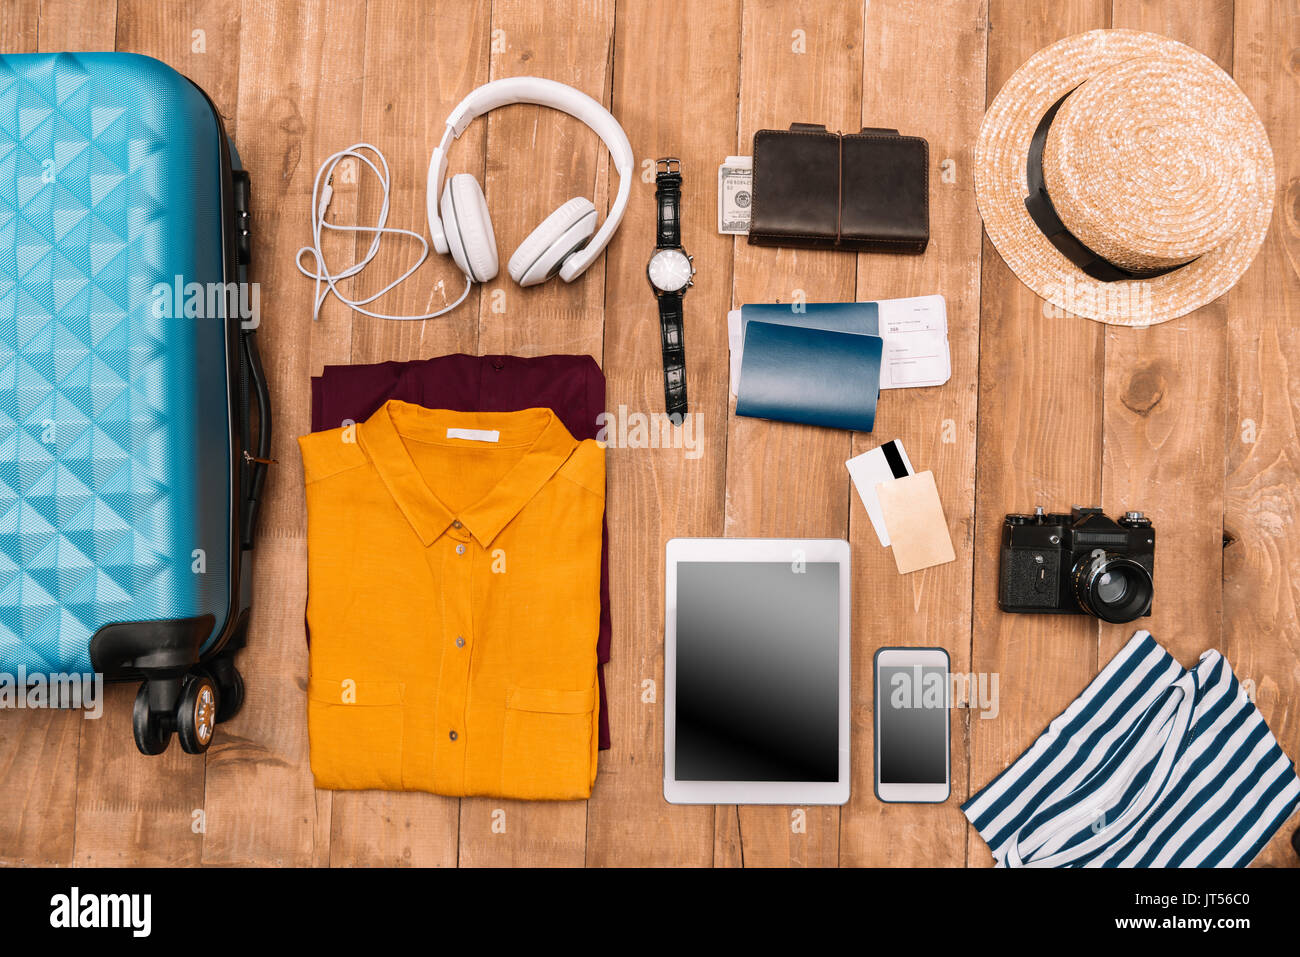 Flat lay of summer vacation things neatly organized on wooden background. Travel concept.  Stock Photo